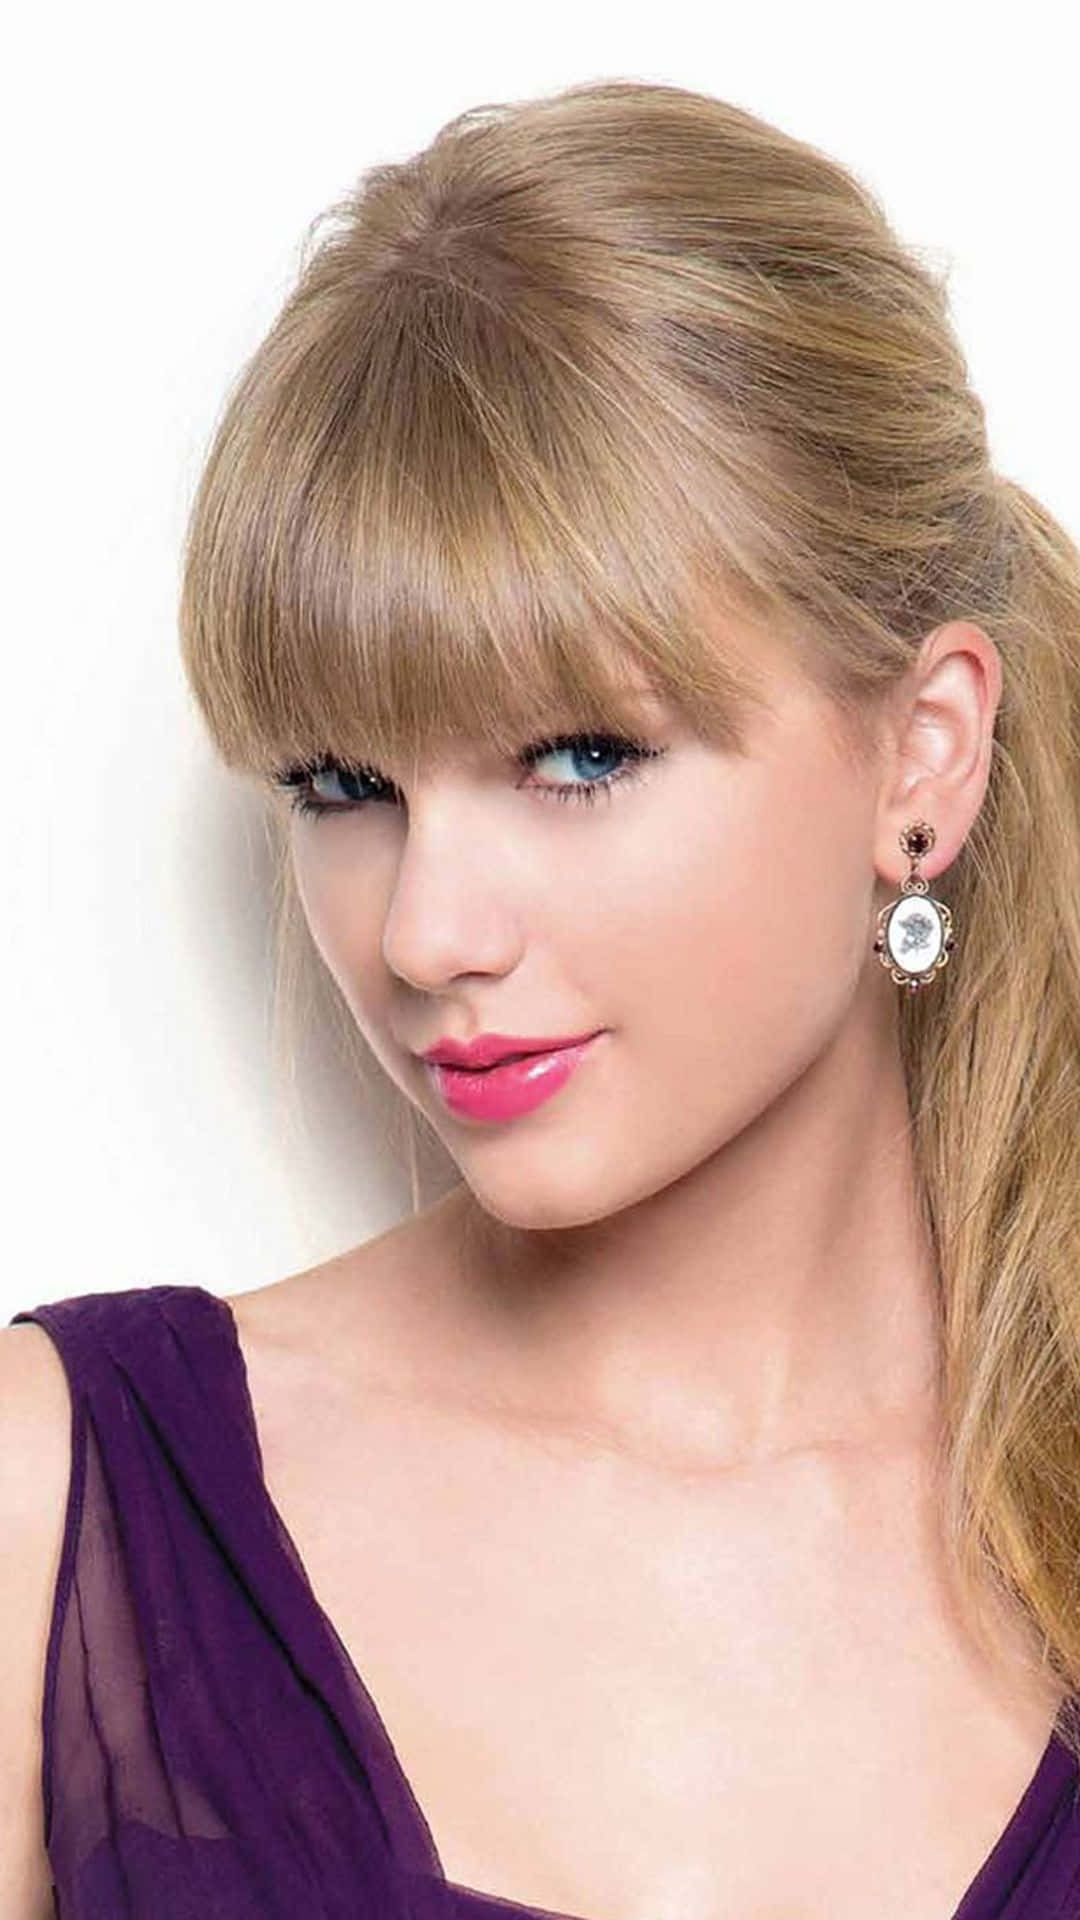 Taylor Swift Smile iPhone Wallpaper